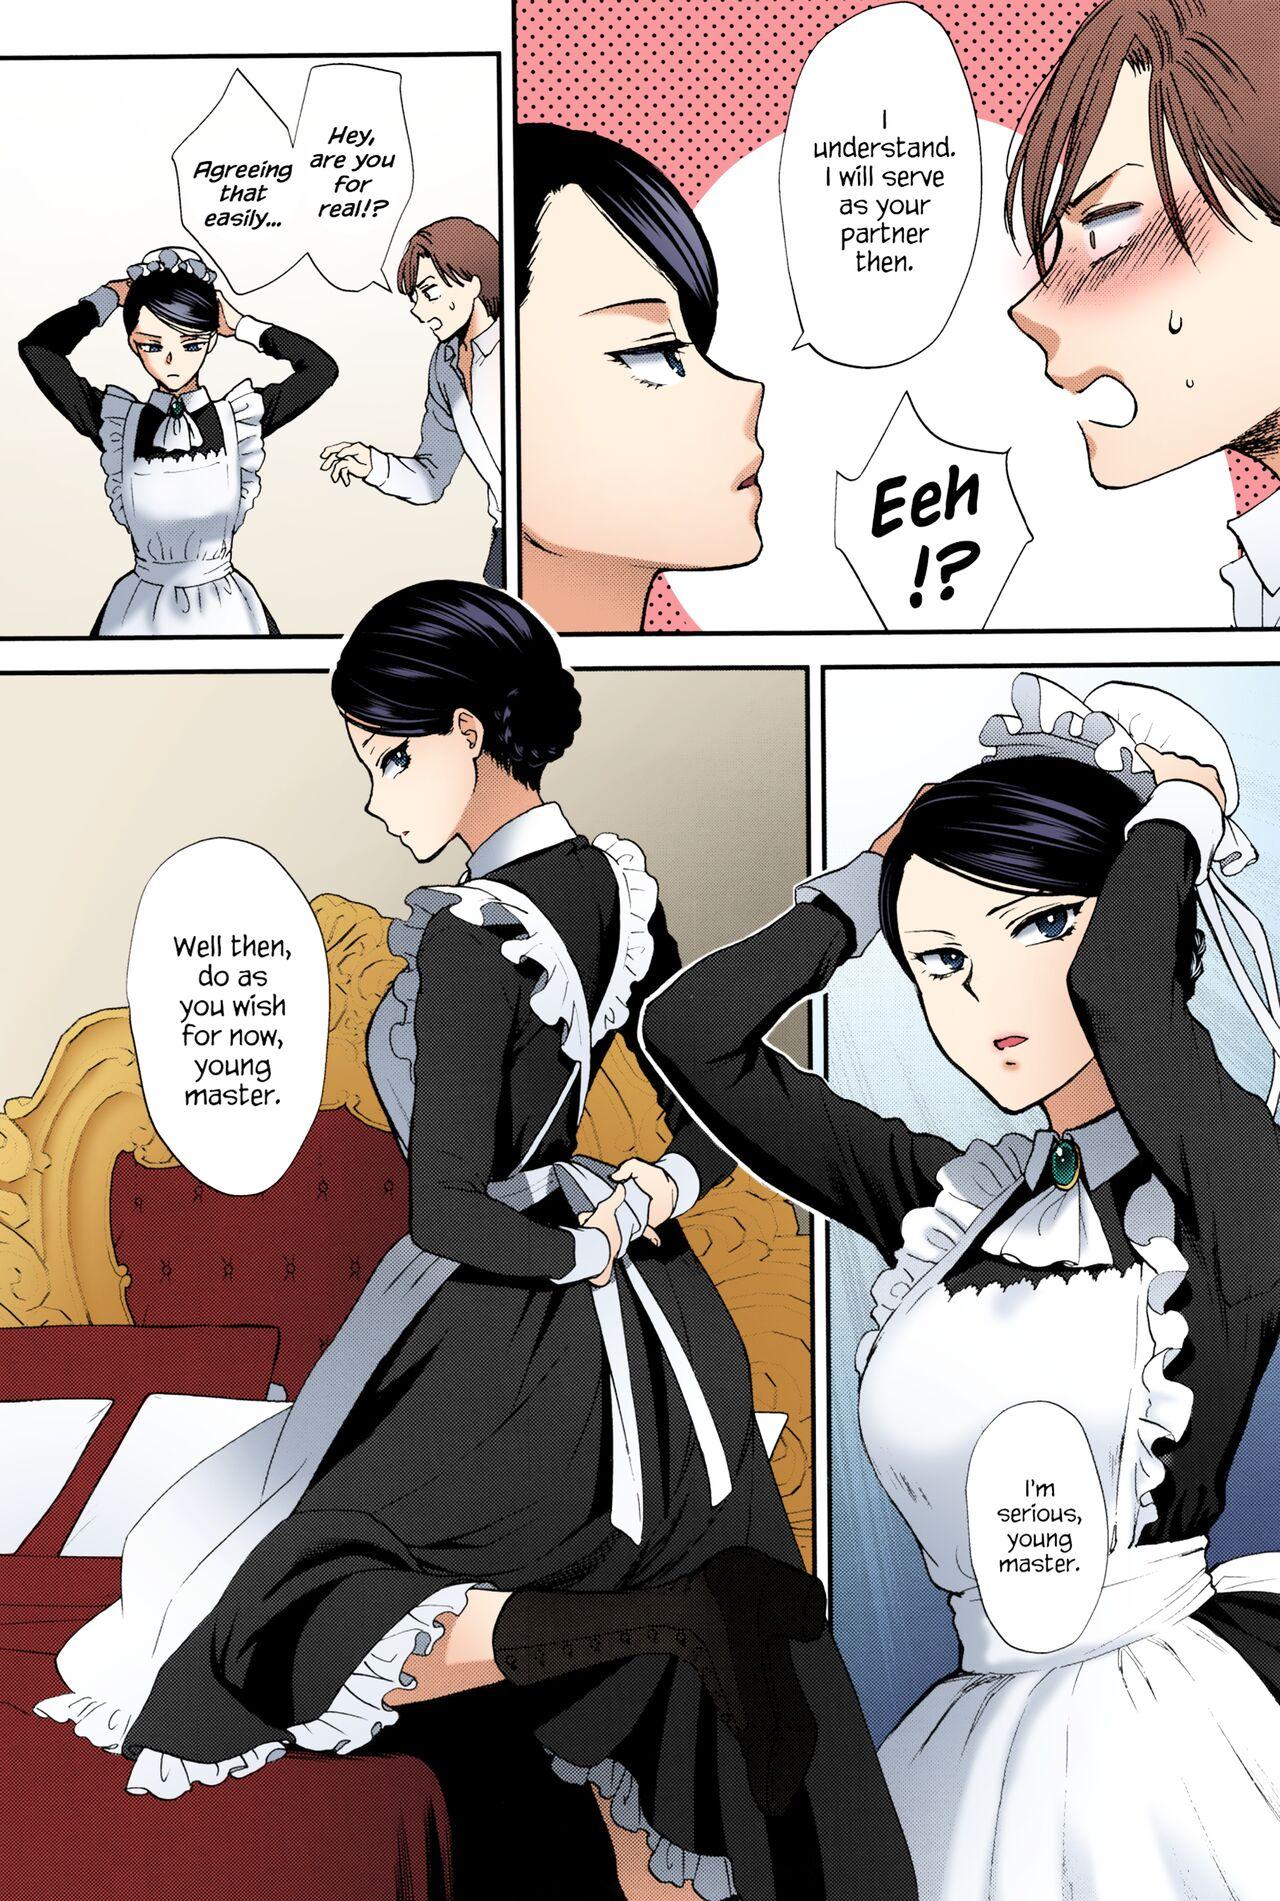 Esposa Kyoudou Well Maid - The Well “Maid” Instructor - Original Wanking - Page 6